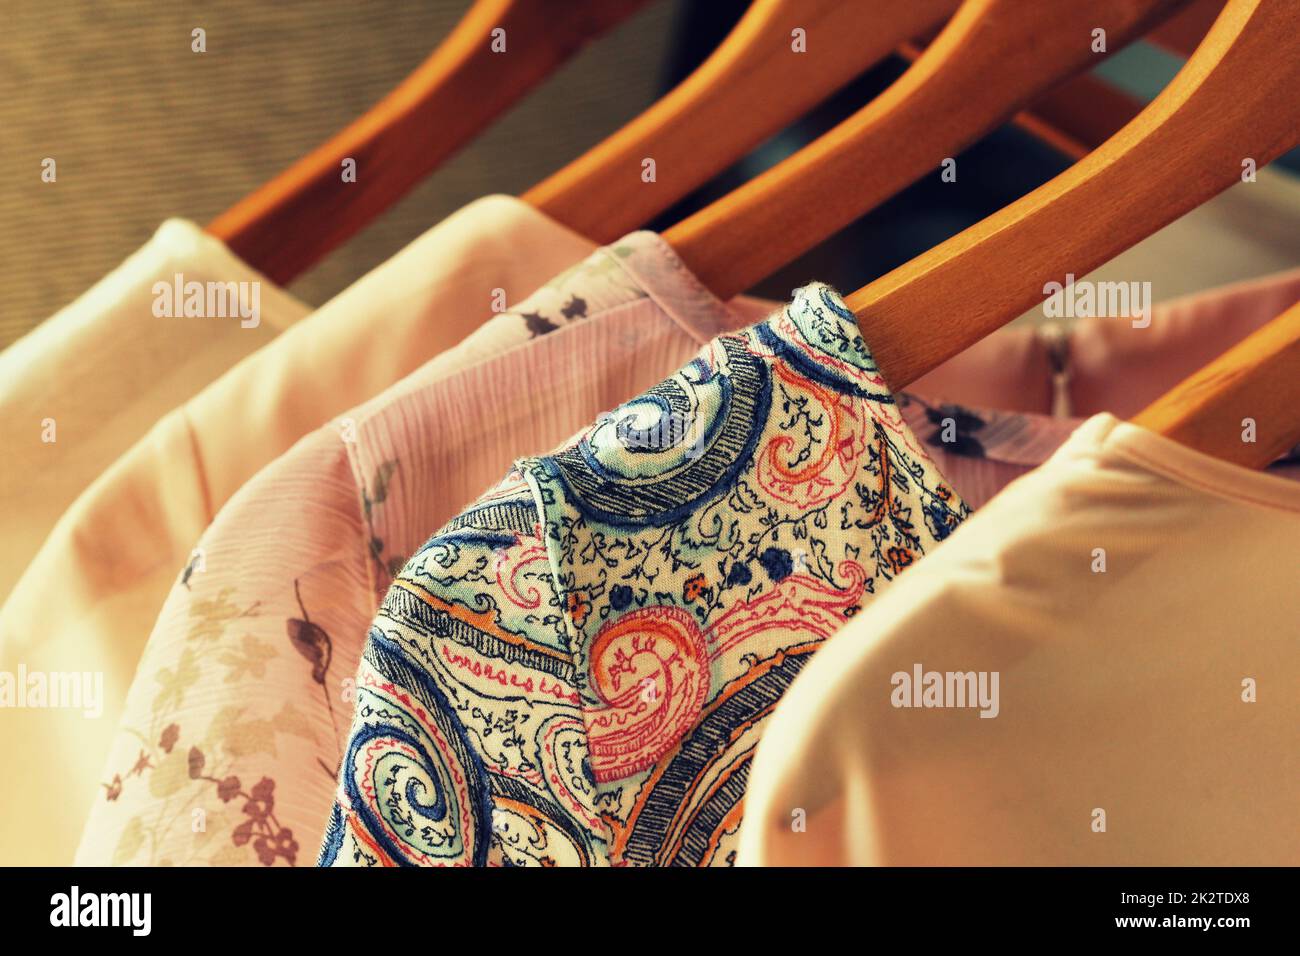 collection of women's clothes hanging on rack Stock Photo